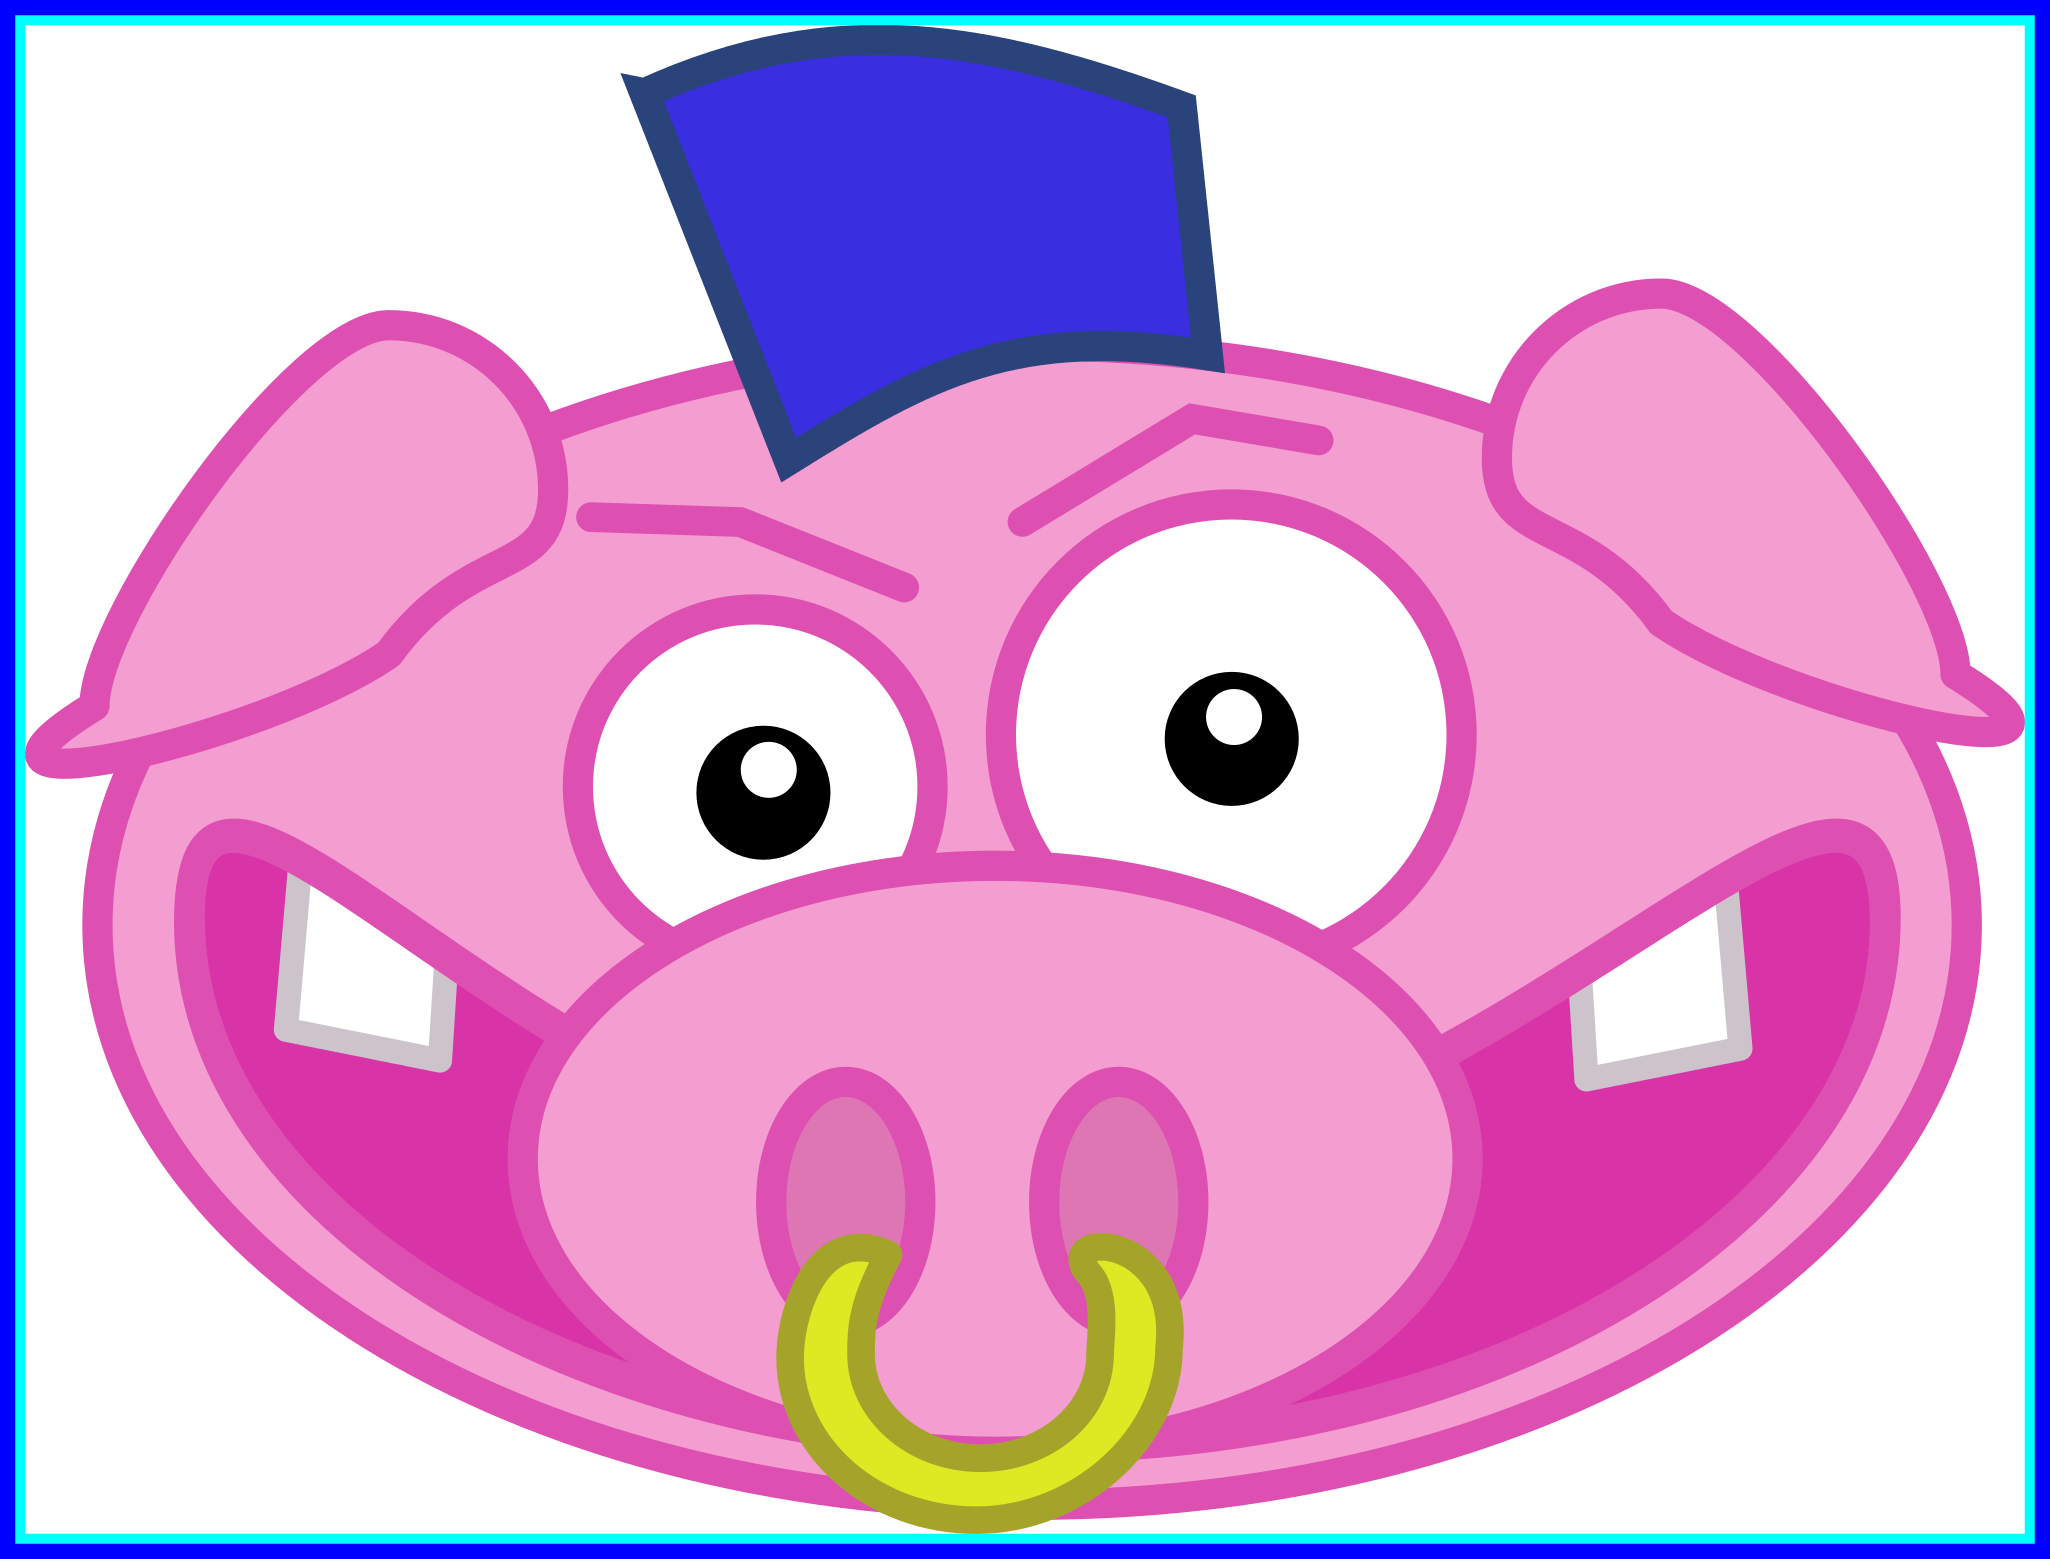 Amazing Pig Clip Art Pict Of Cute Silhouette And Trend - Pig With A Ring In Its Nose (2050x1559)